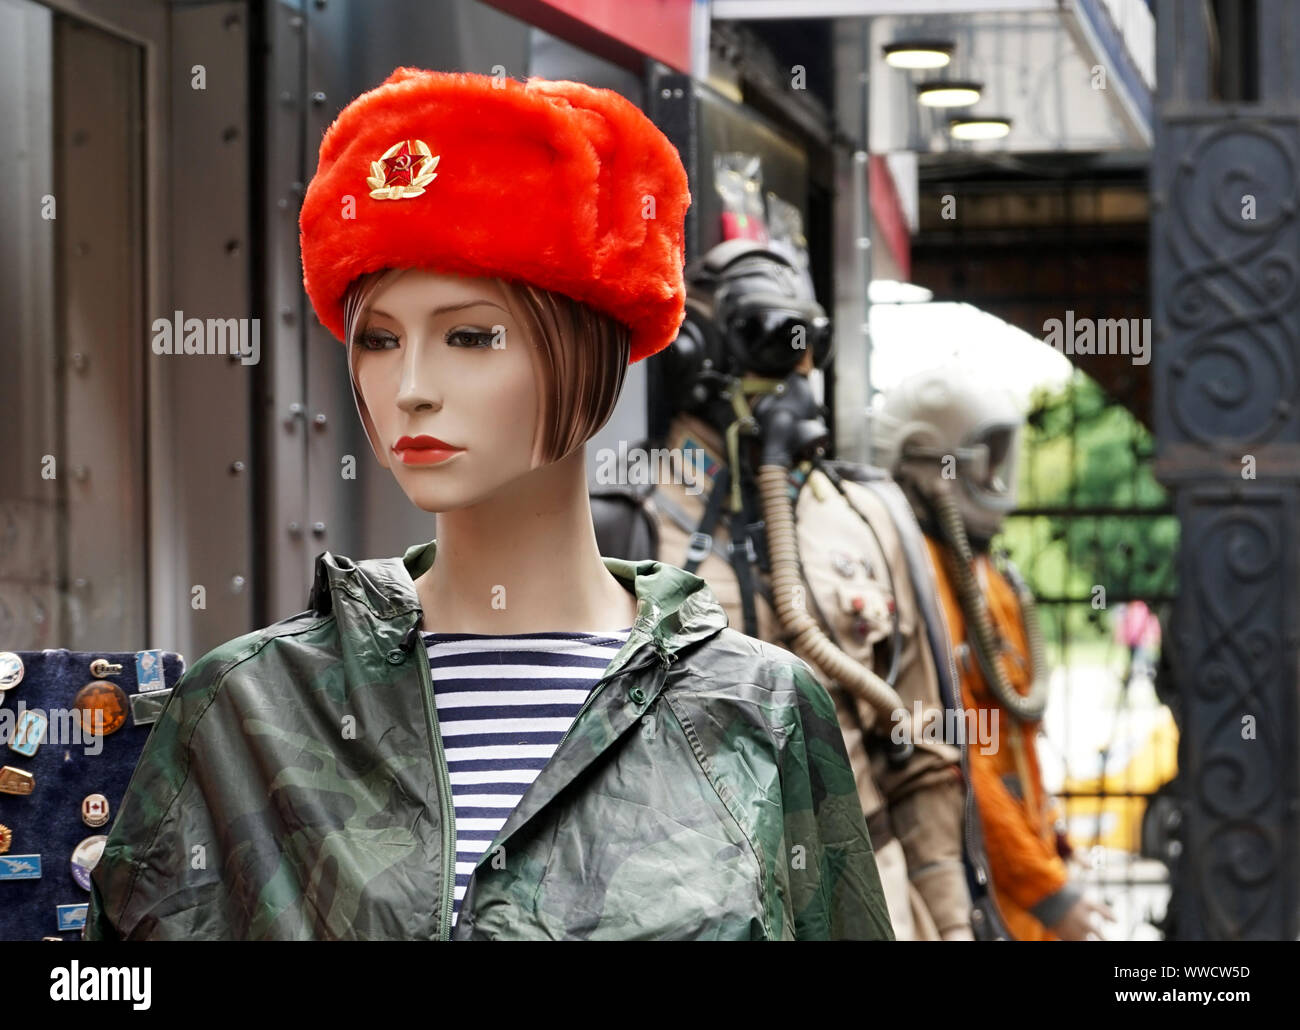 Female mannequin in a souvenir red Russian military cap. Stock Photo